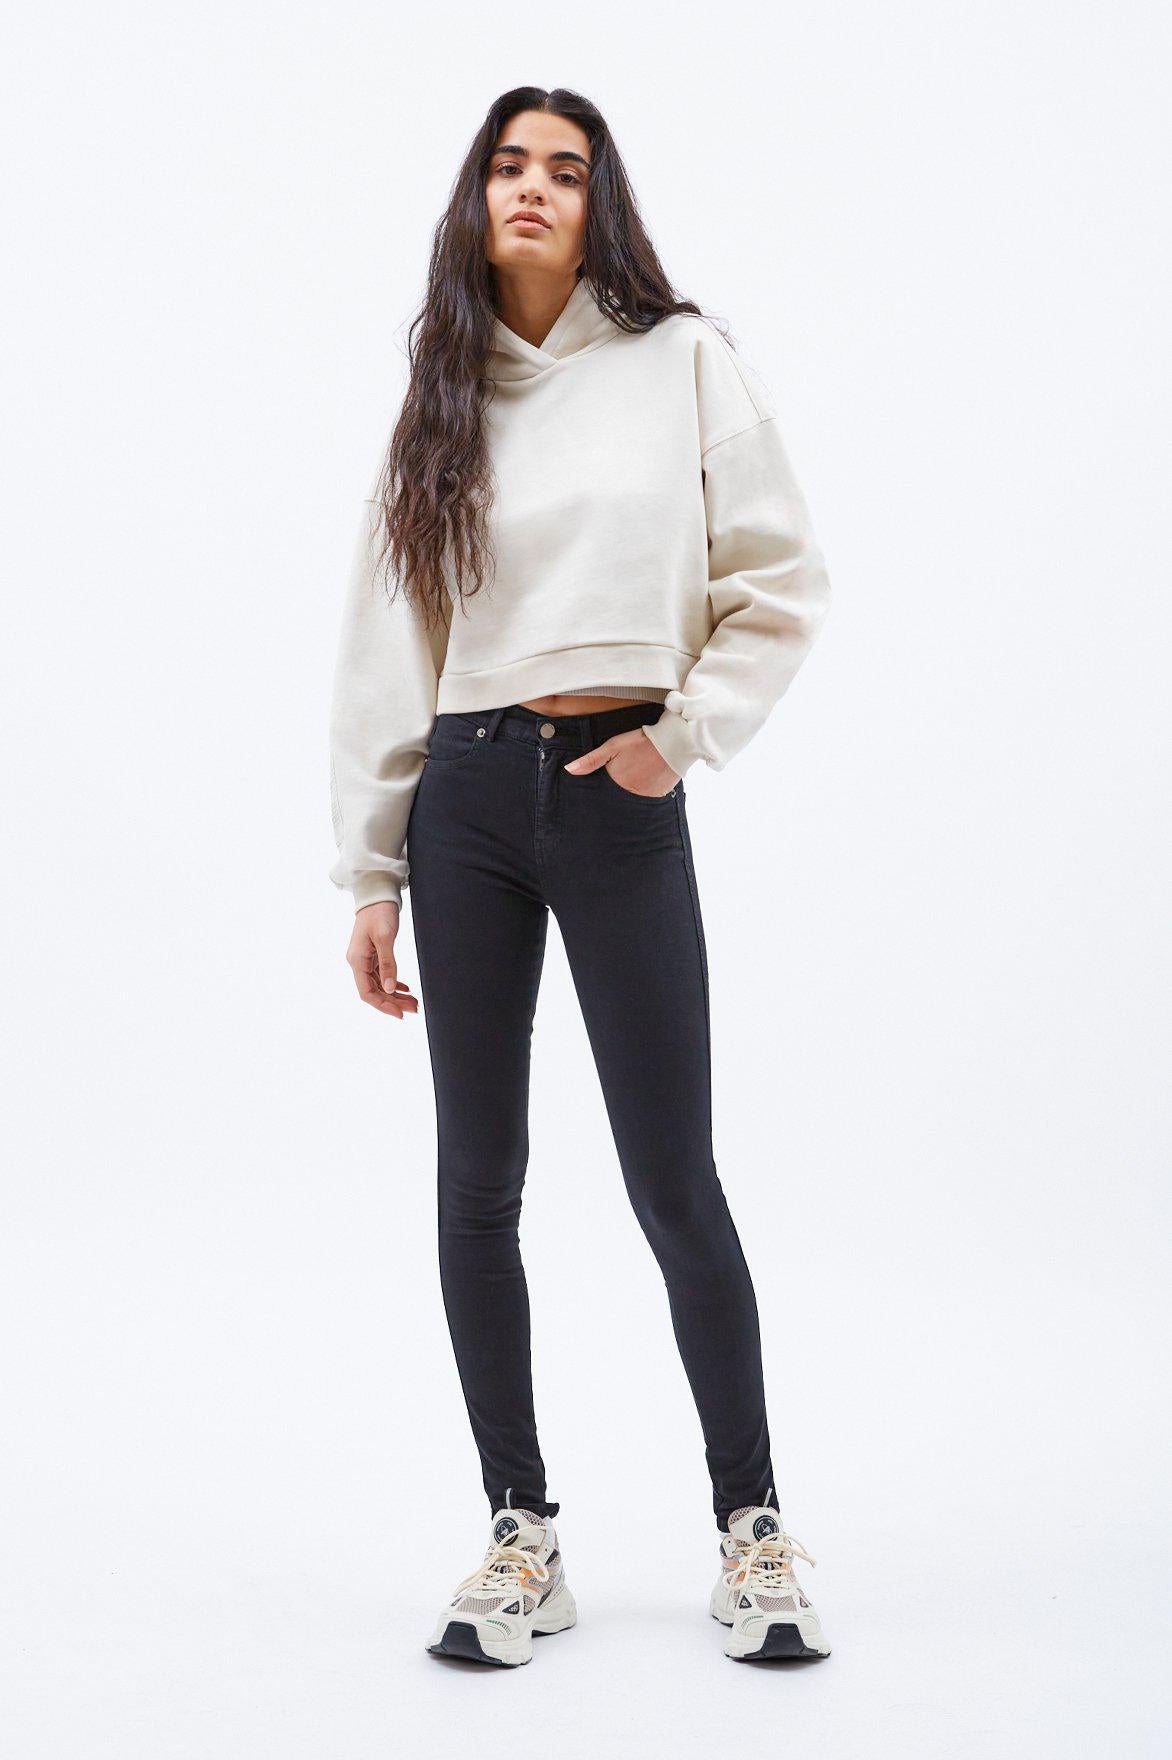 Lexy black skinny jeans mid rise